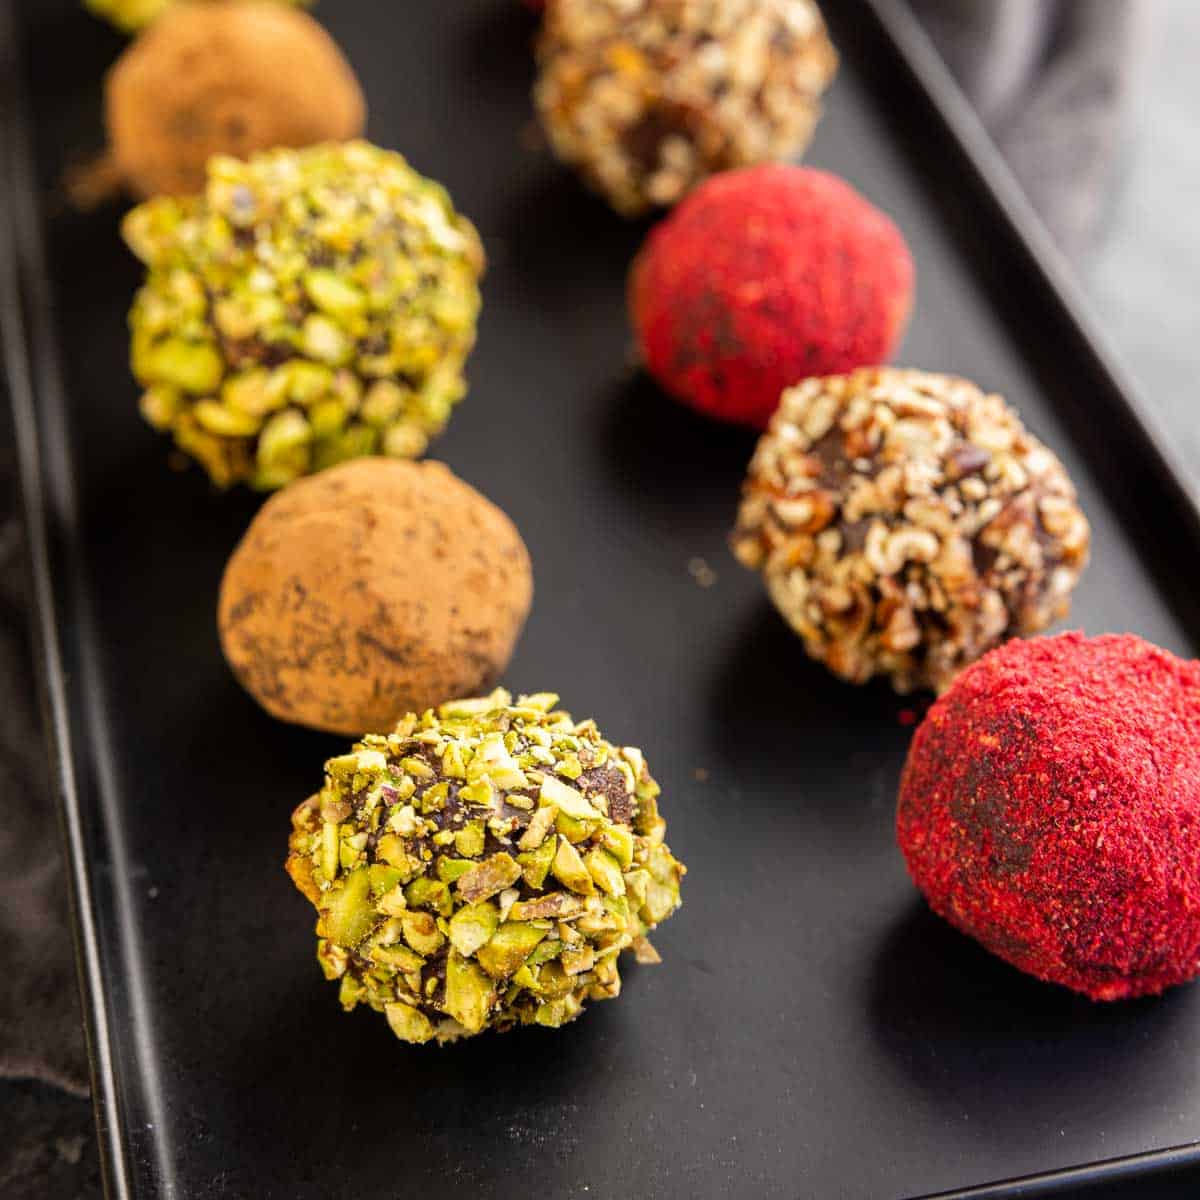 Chocolate Truffles rolled in chopped pistachio